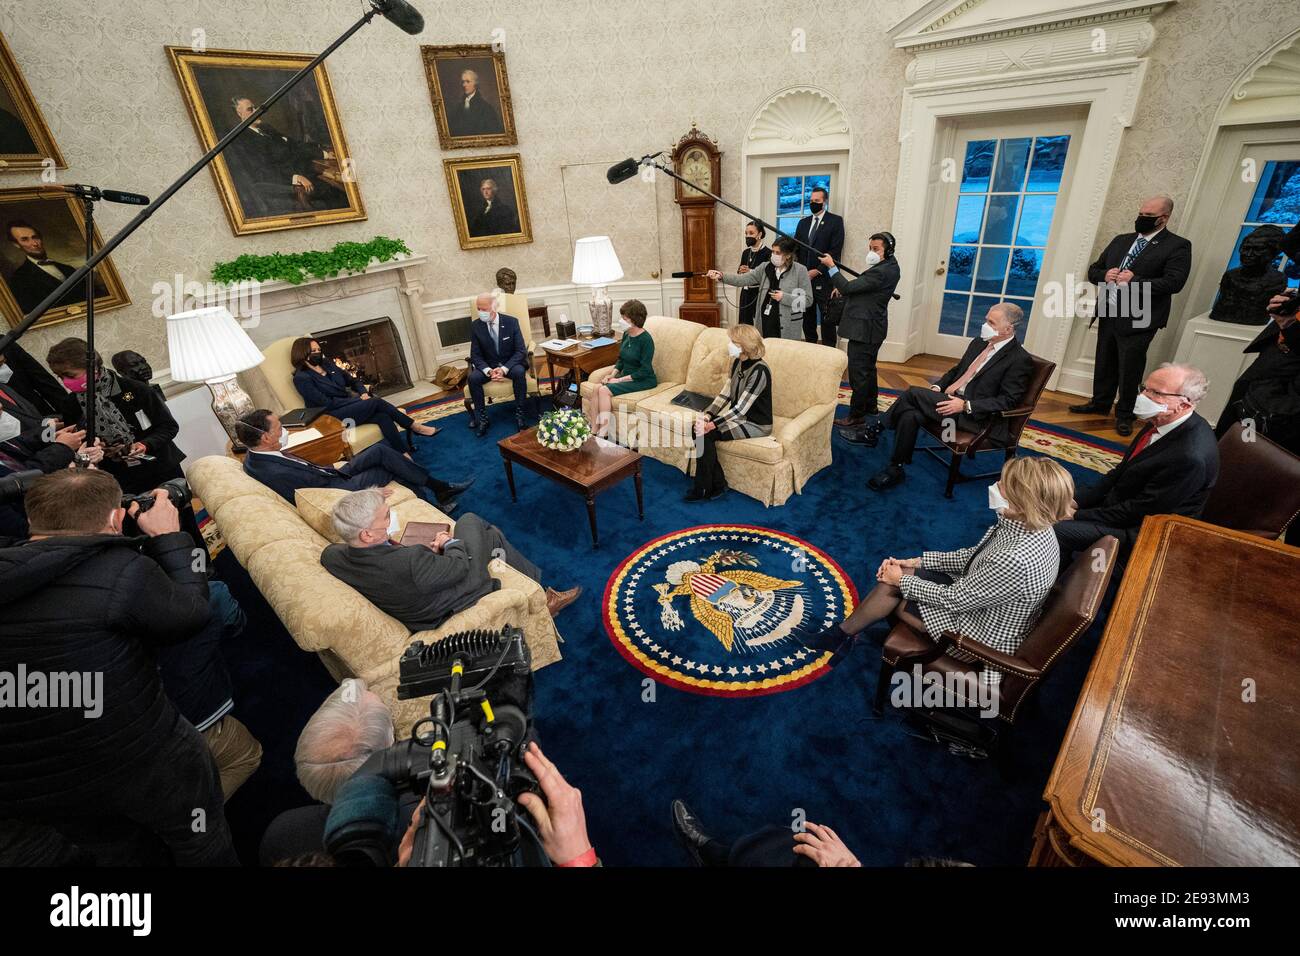 United States President Joe Biden and US Vice President Kamala Harris meet with Republican US Senators about the American Rescue Plan, in the Oval Office of the White House in Washington, DC, Monday, Feb.1, 2021. Credit: Doug Mills/Pool via CNP /MediaPunch Stock Photo